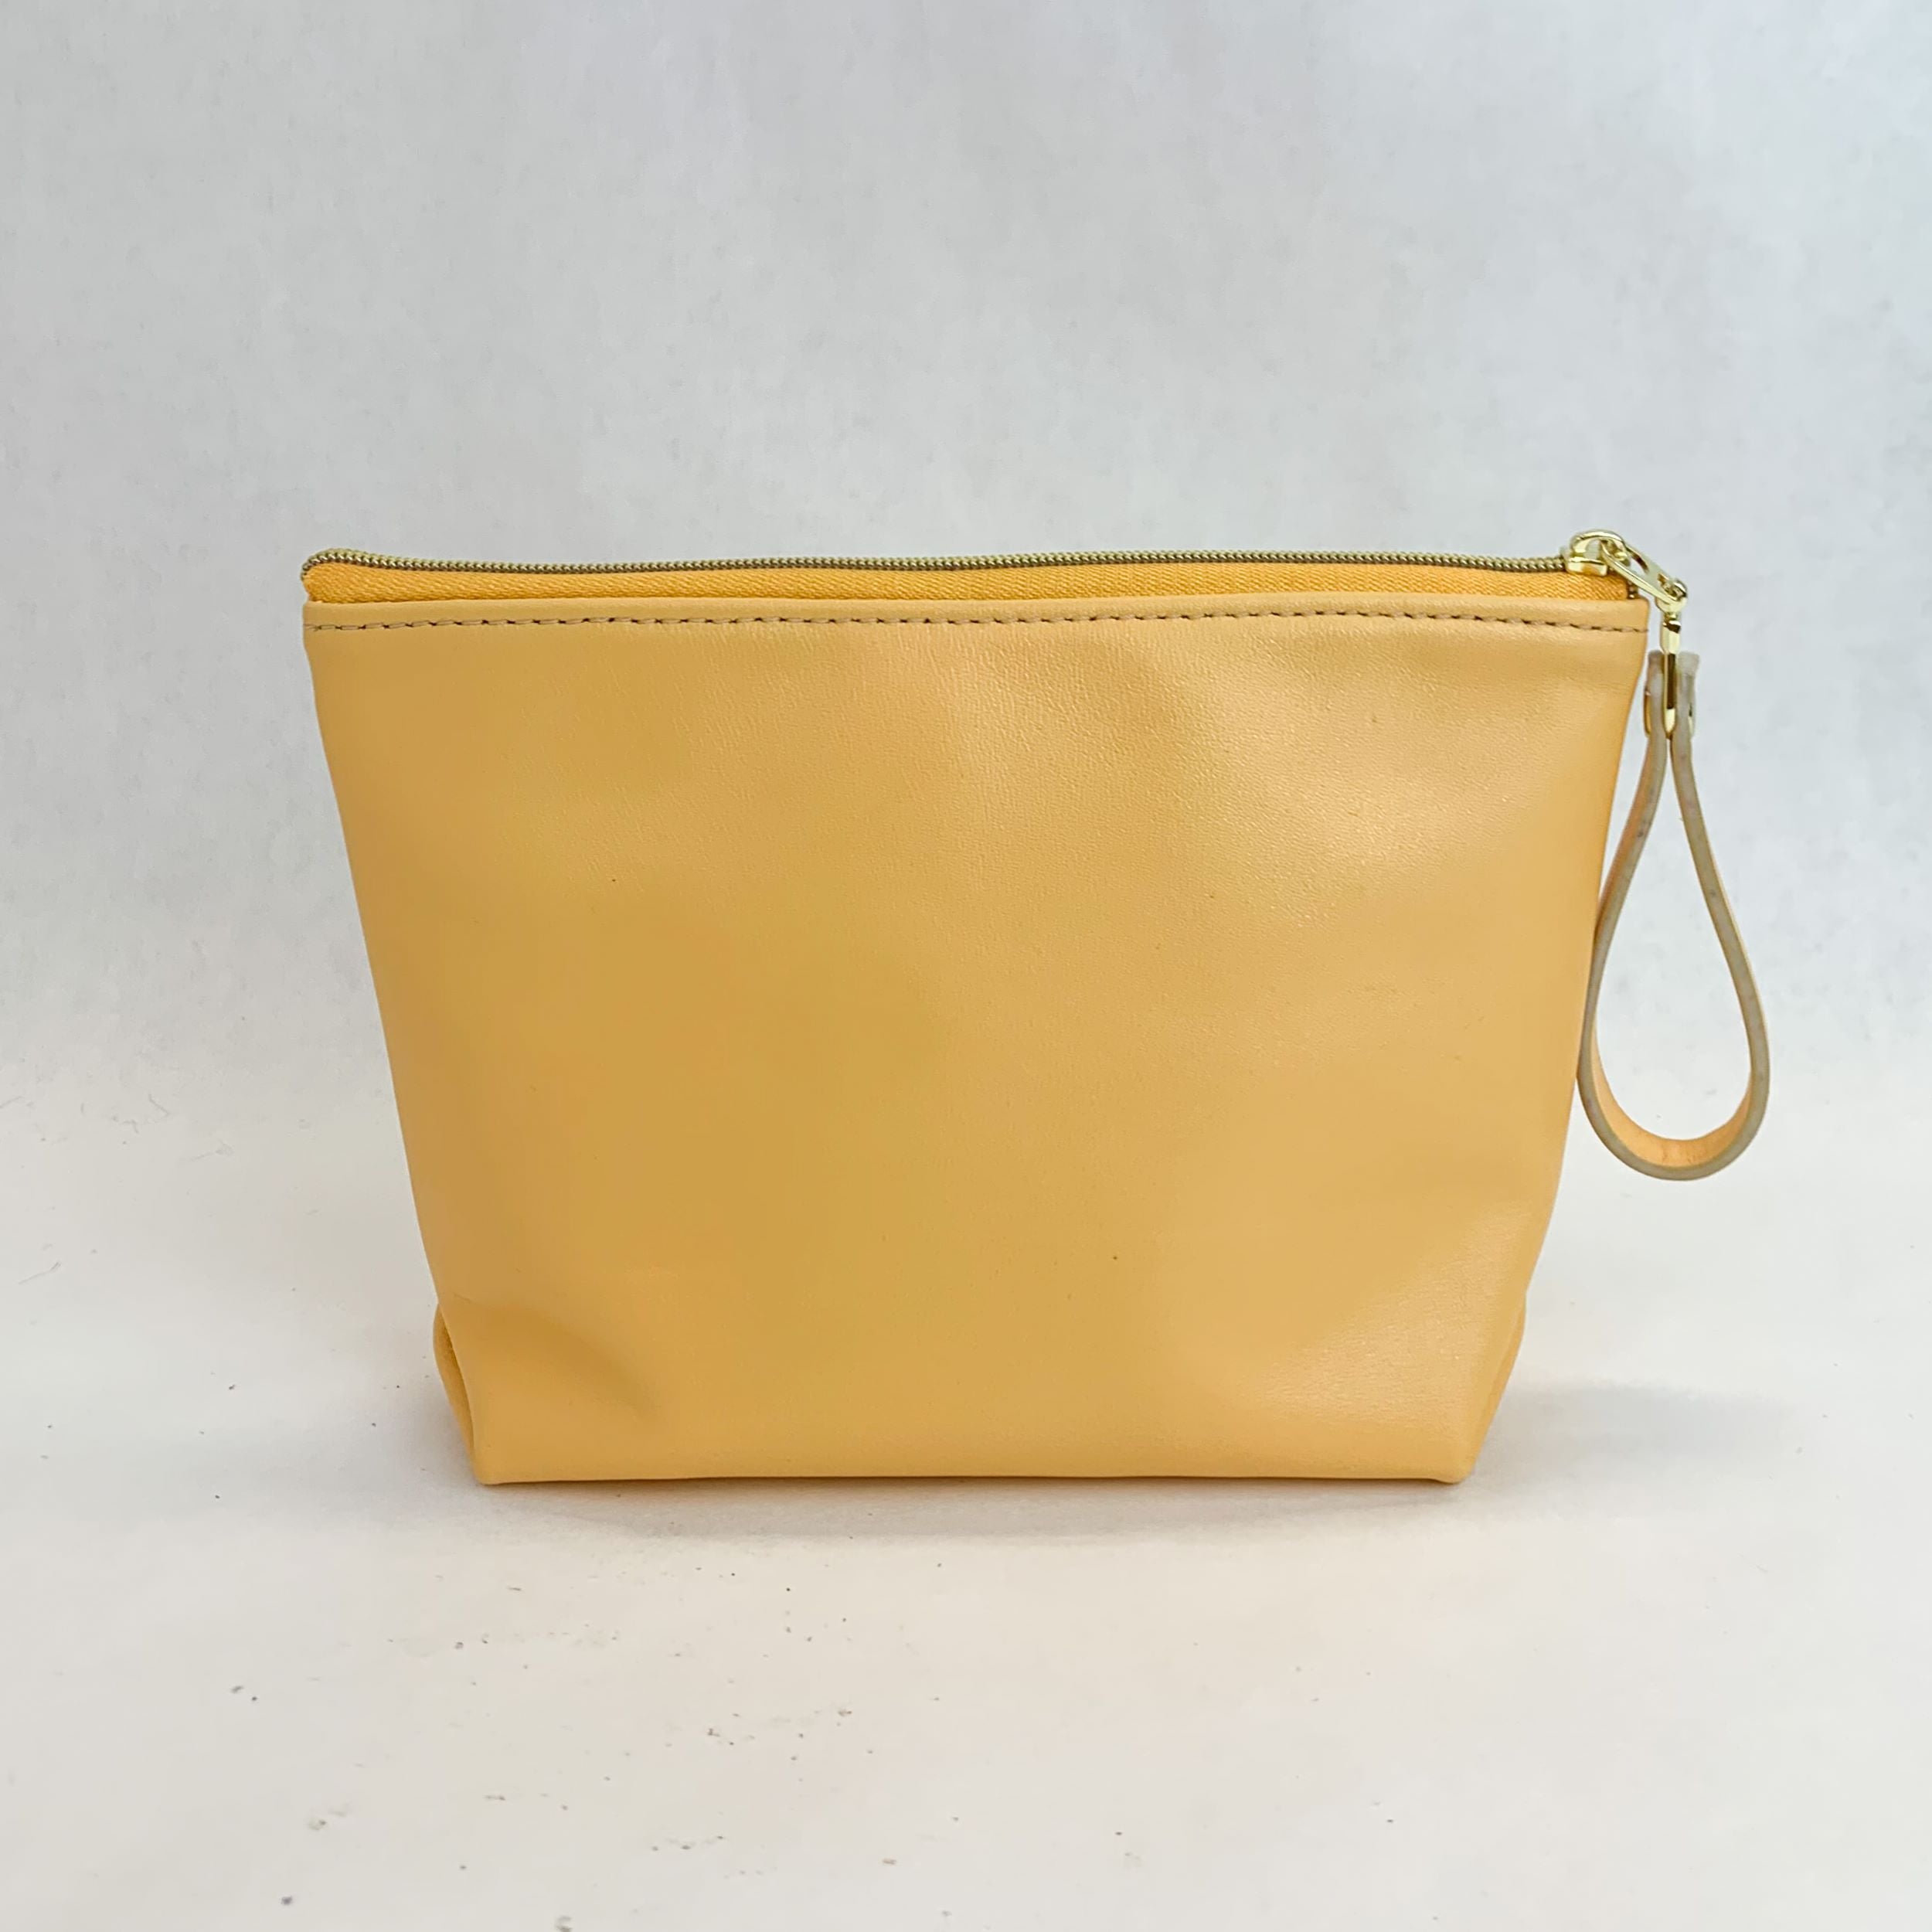 Back view T5 Cosmetics case toiletry bag designer handcrafted in smooth calf leather in saffron yellow.